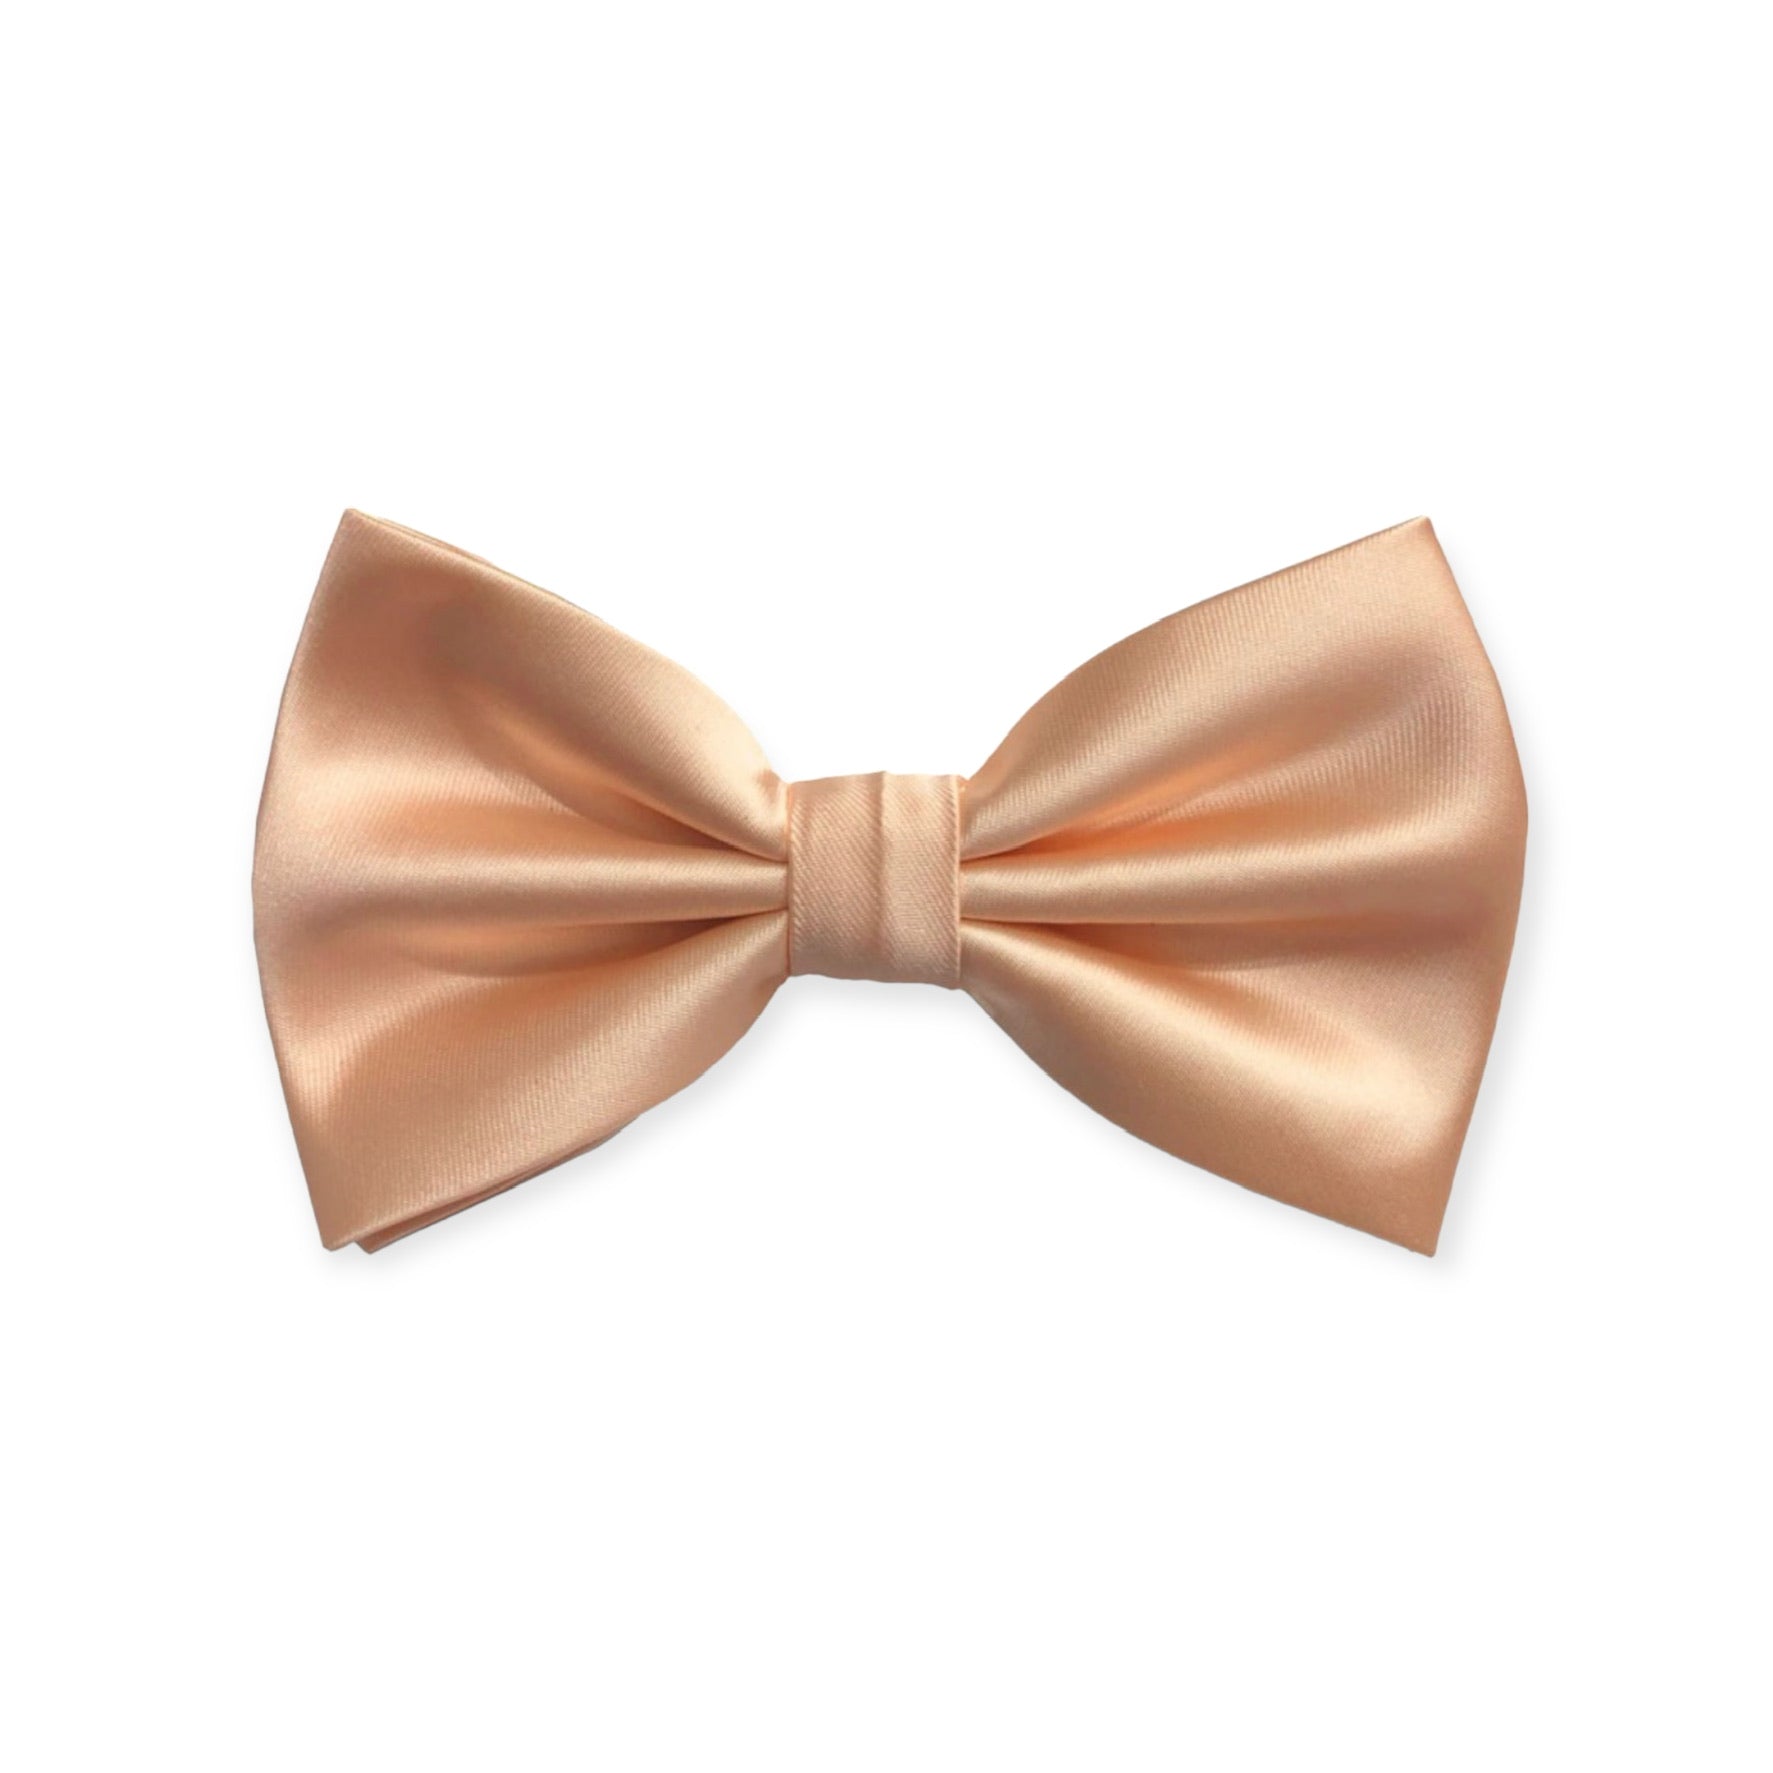 Solid Peach Bow Tie and Hanky